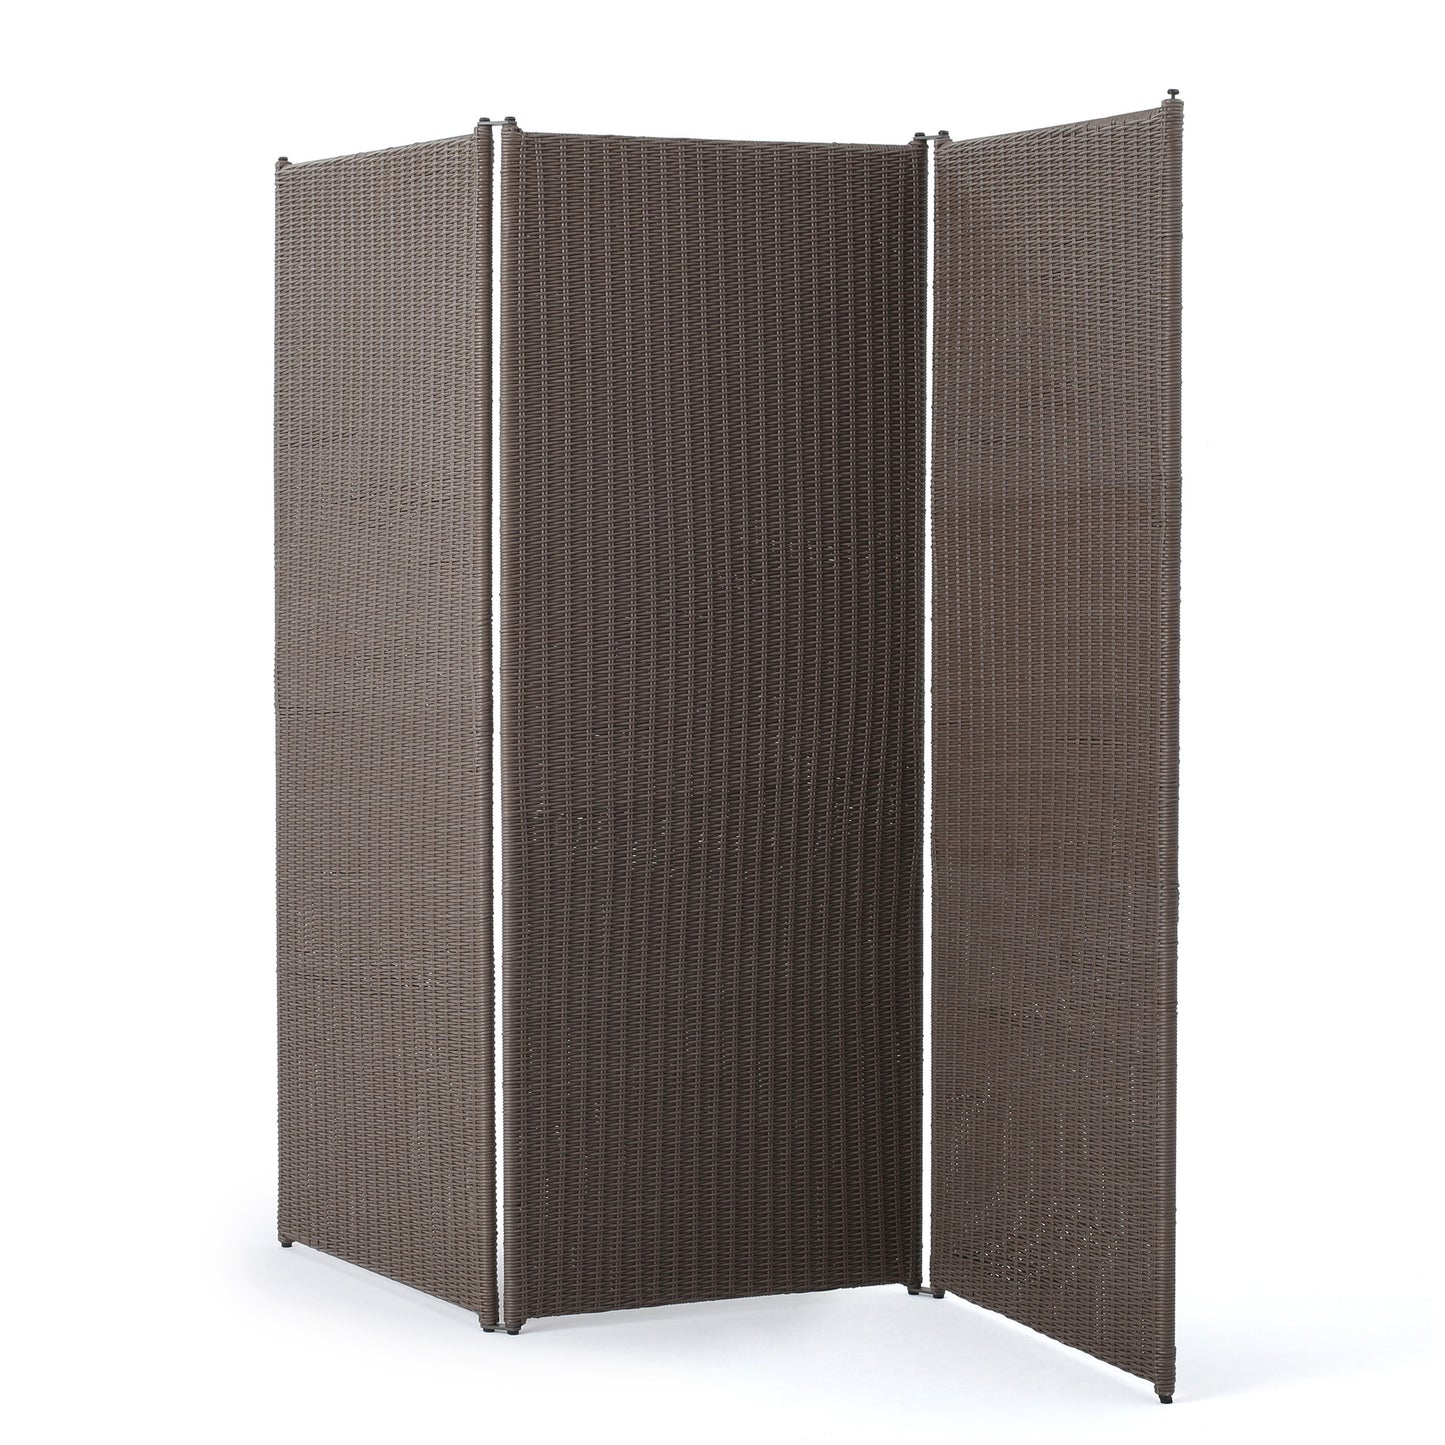 Osage Outdoor Wicker Privacy Screen